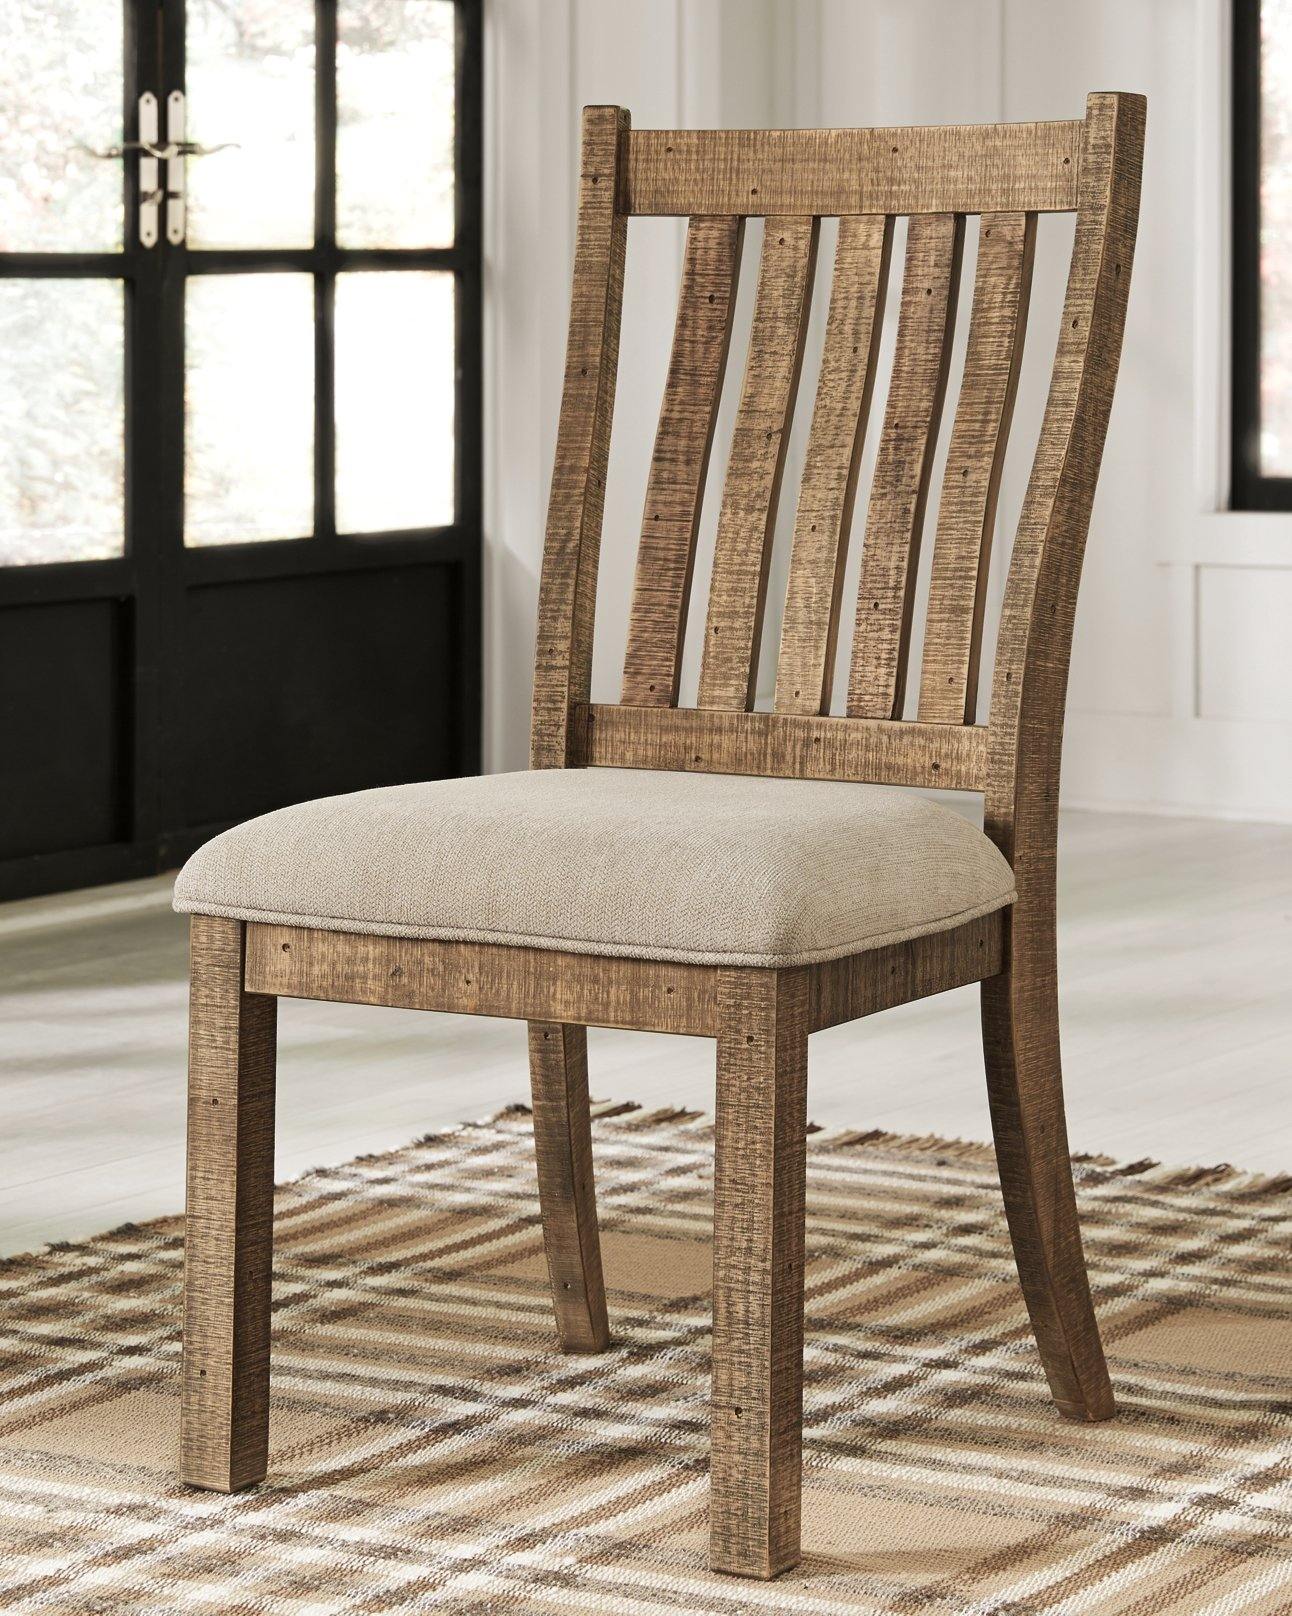 Grindleburg Dining Chair D754-05 Light Brown Casual formal seating By ashley - sofafair.com